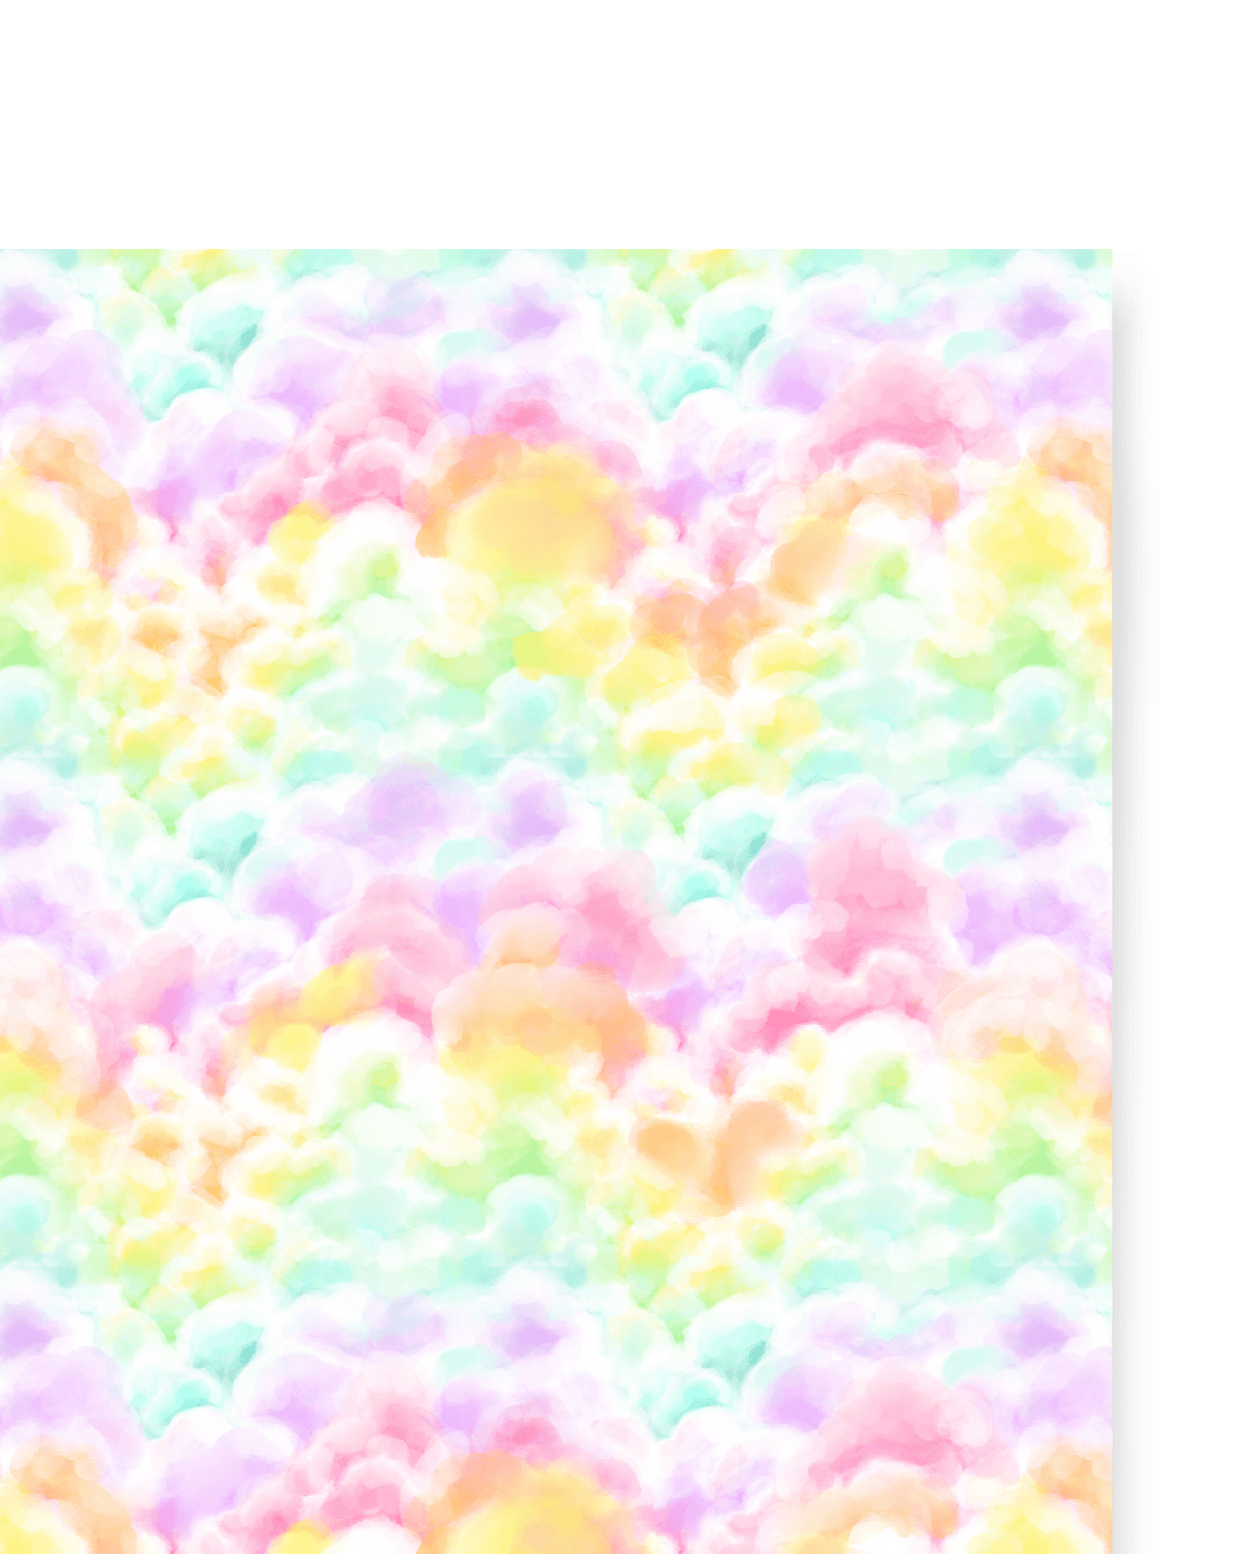 Single sheet of rainbow clouds gift wrap. A pastel rainbow design on layers of thick Cumulonimbus clouds.